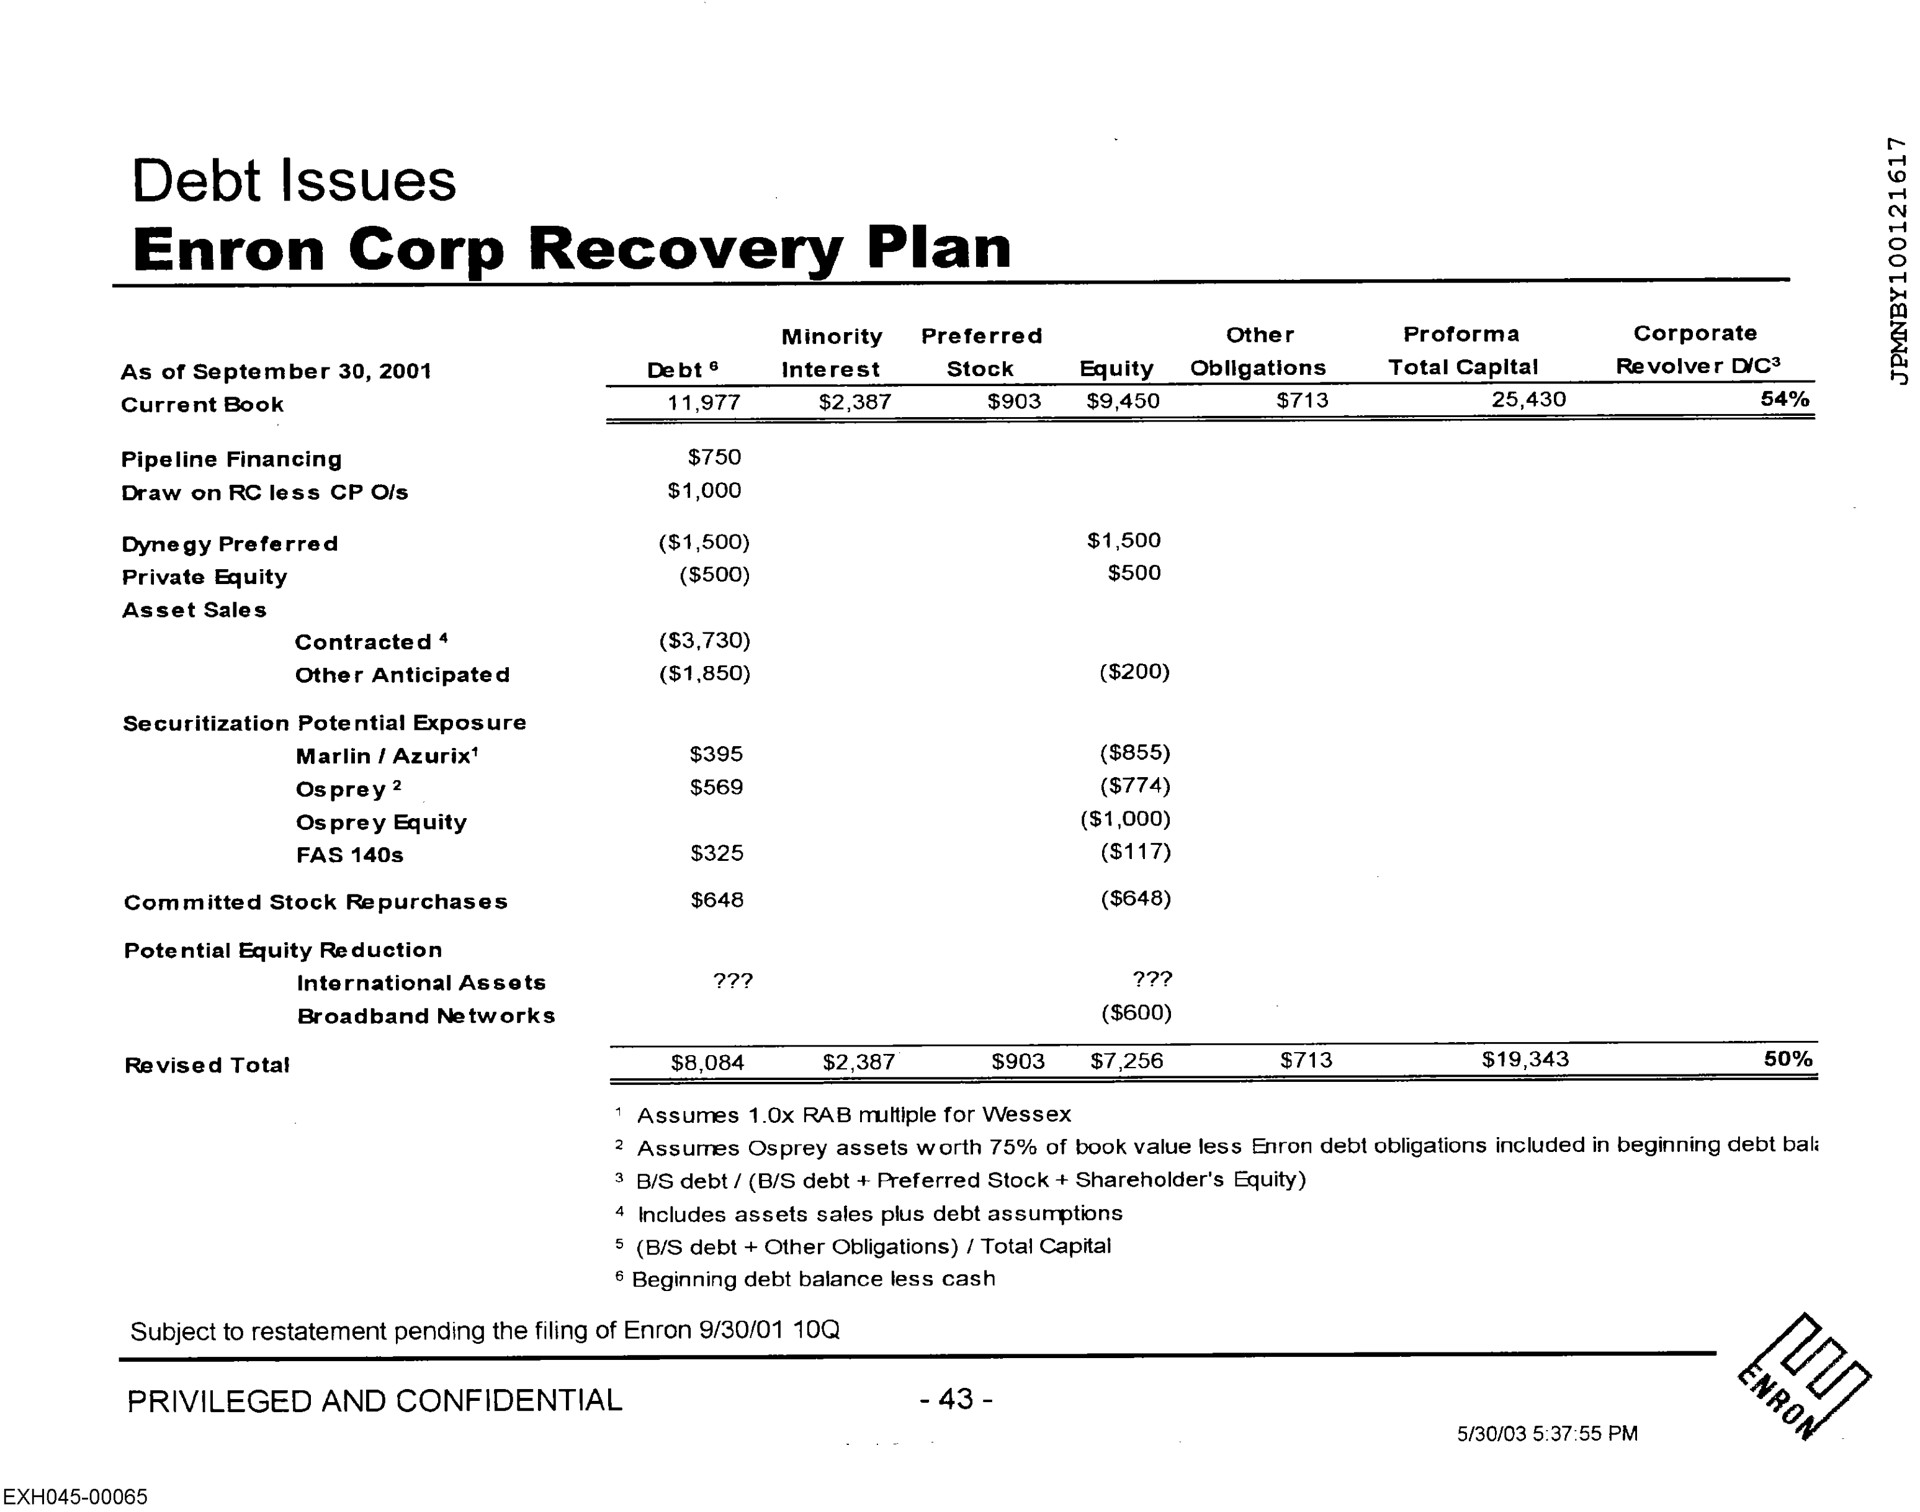 debt issues corp recovery plan | Enron